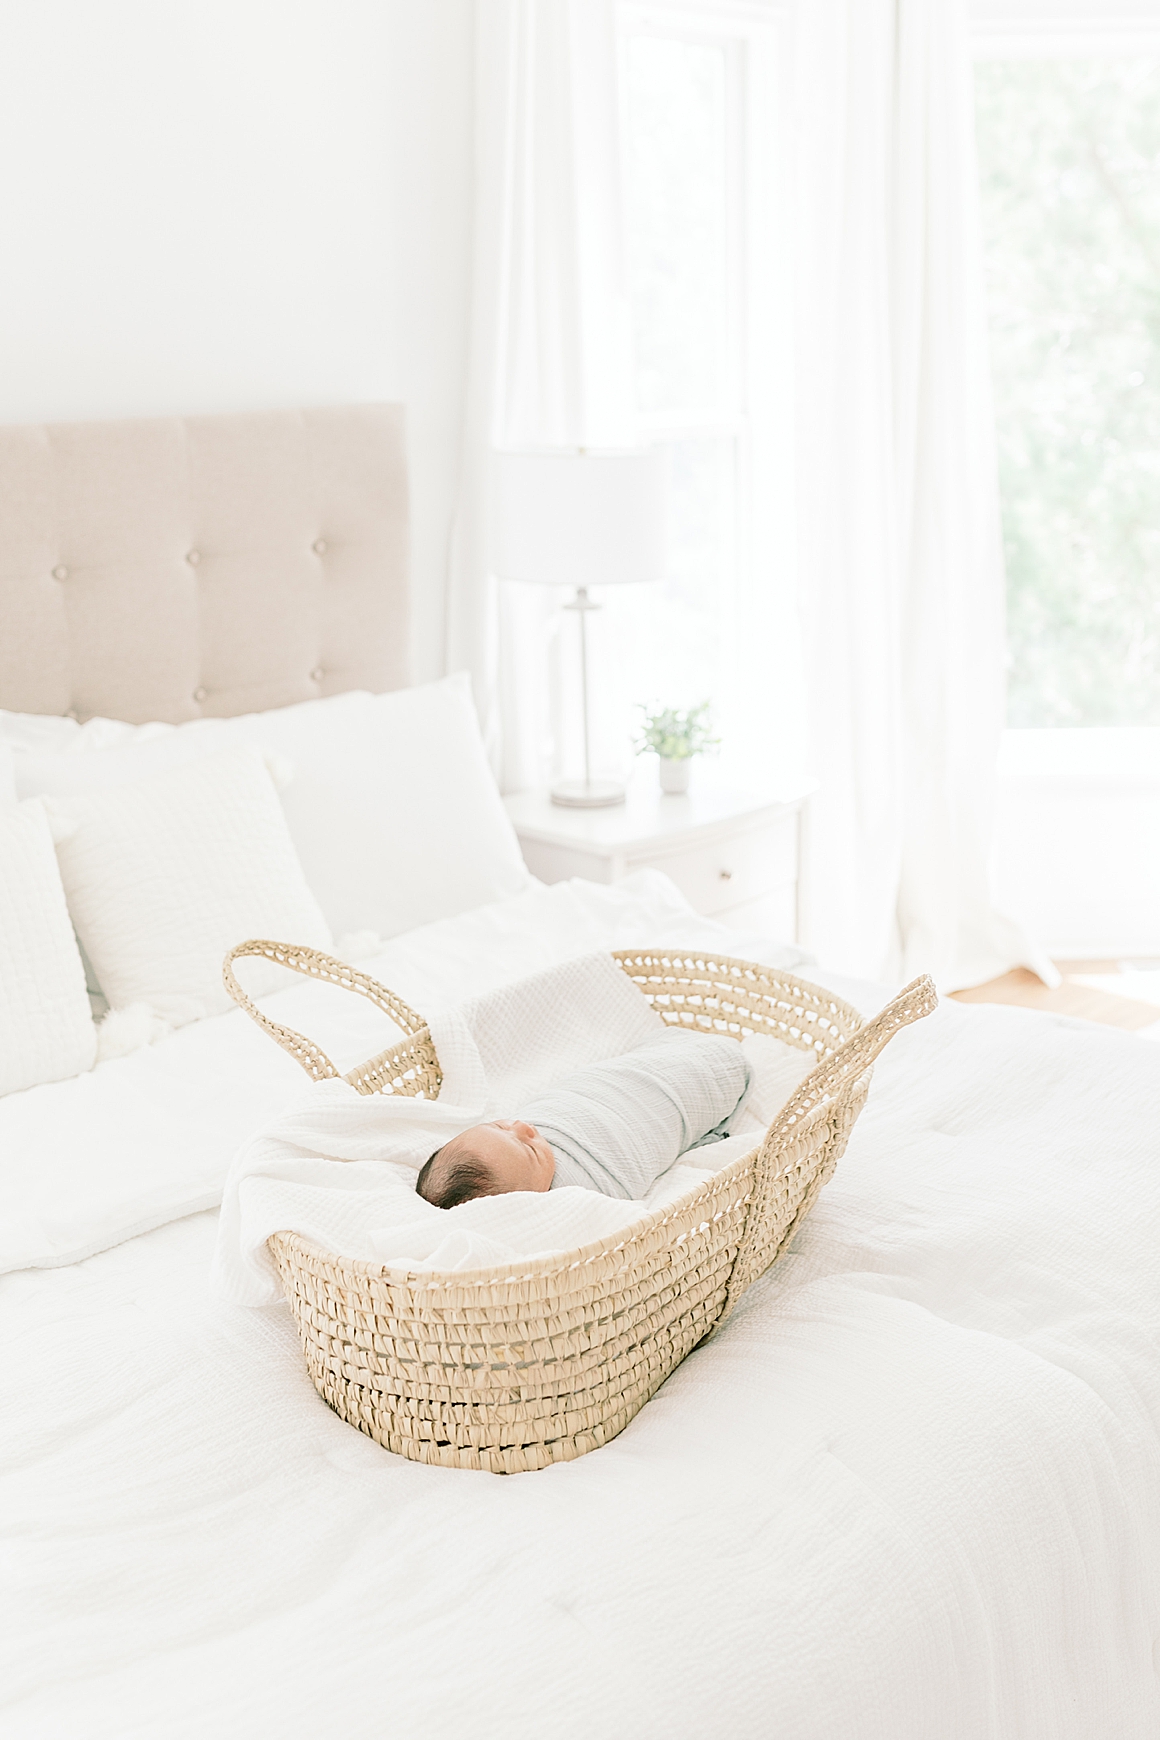 Baby boy in Moses basket during newborn session with Caitlyn Motycka Photography